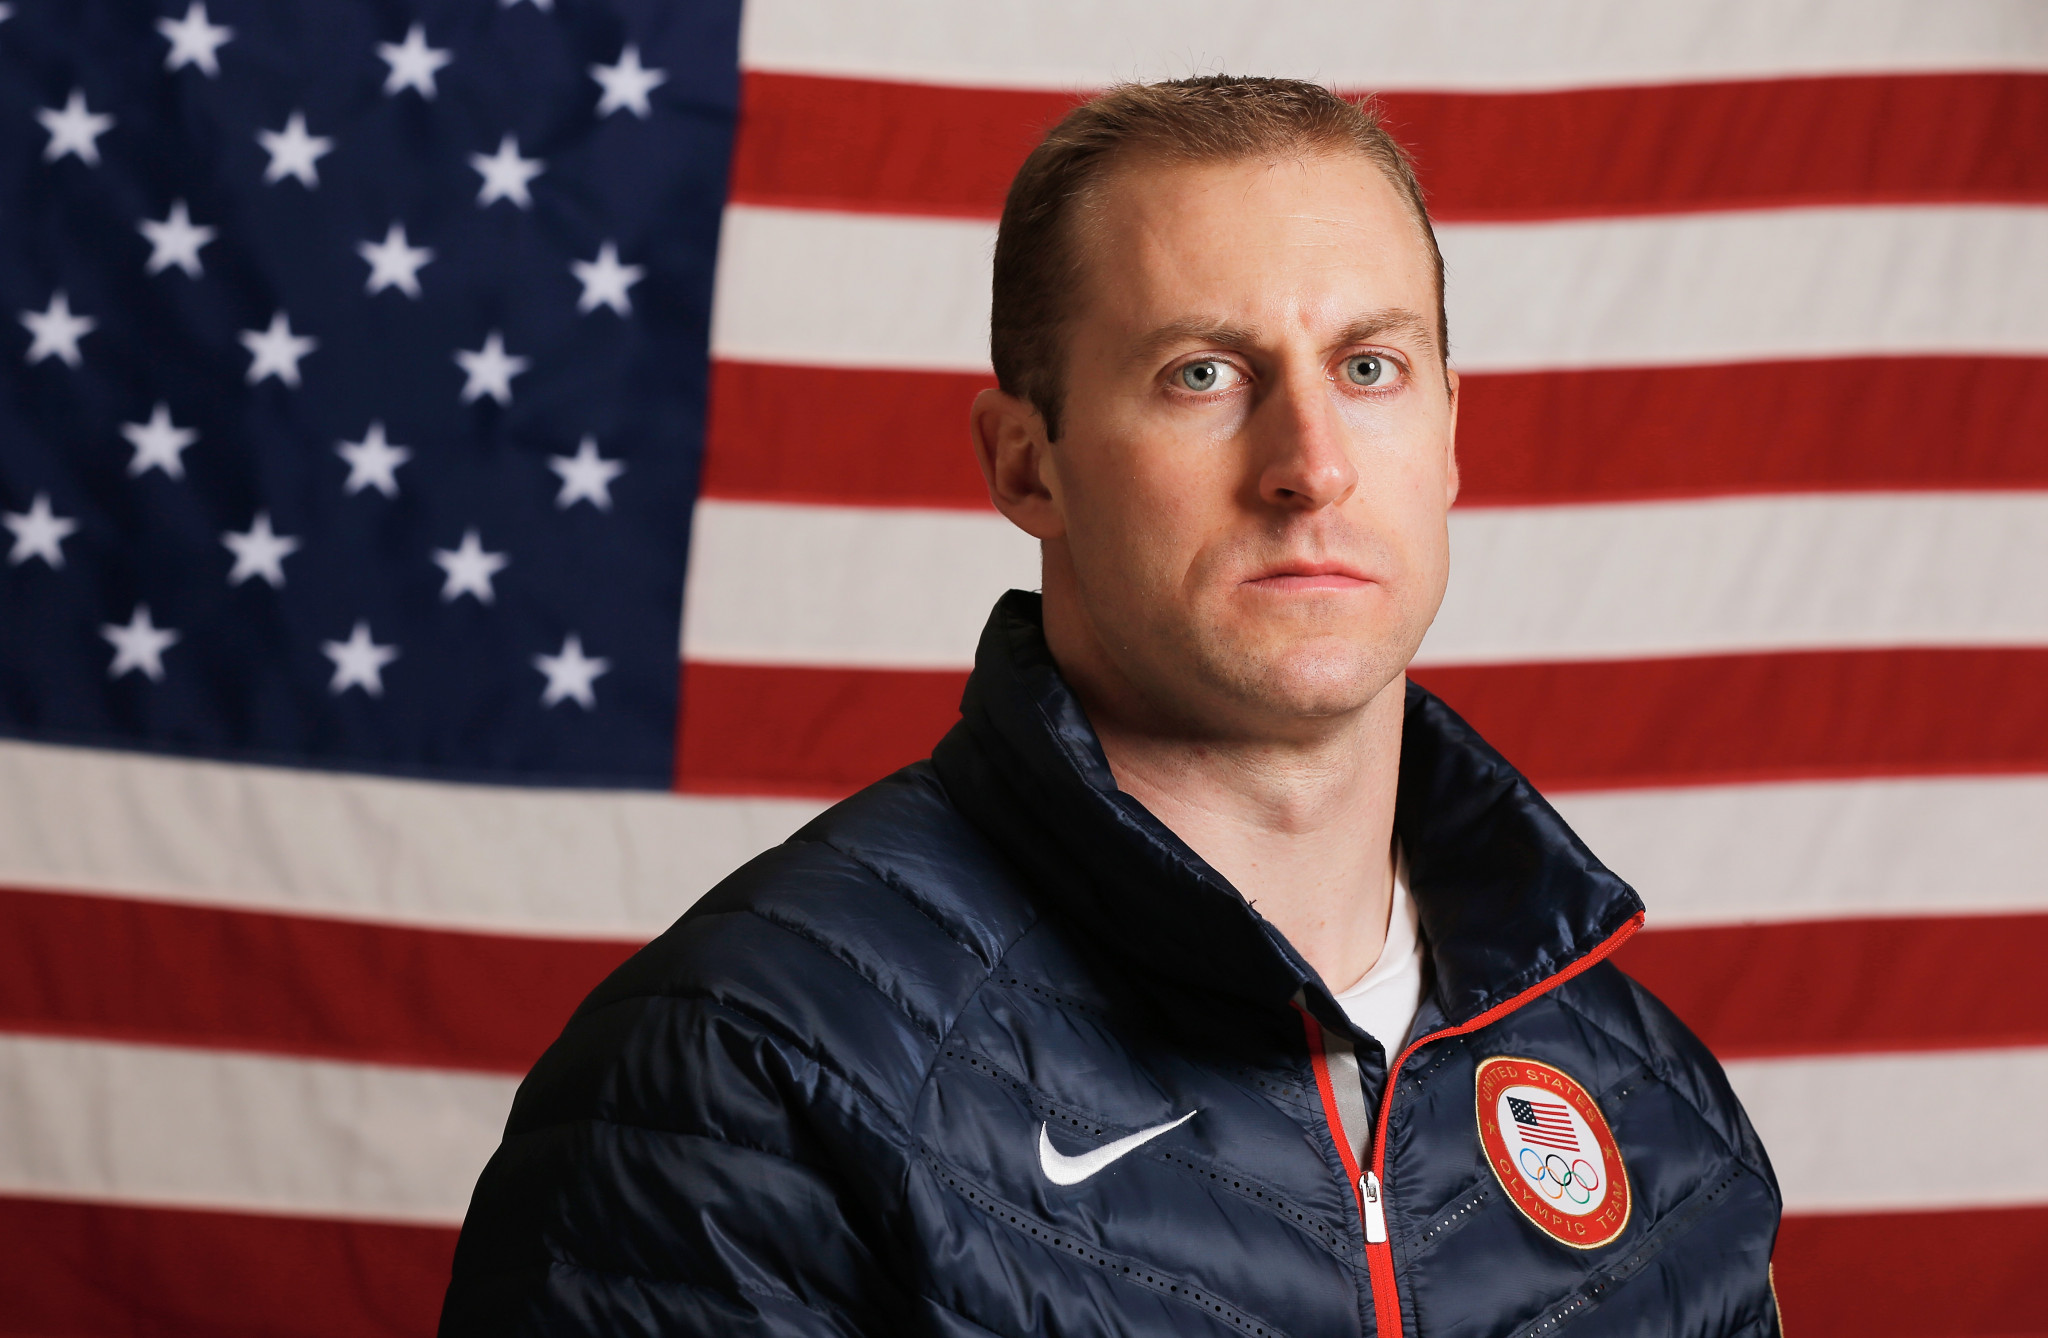 Olympic gold medallist Curt Tomasevicz has been appointed as director of sports performance at USA Bobsled & Skeleton ©Getty Images